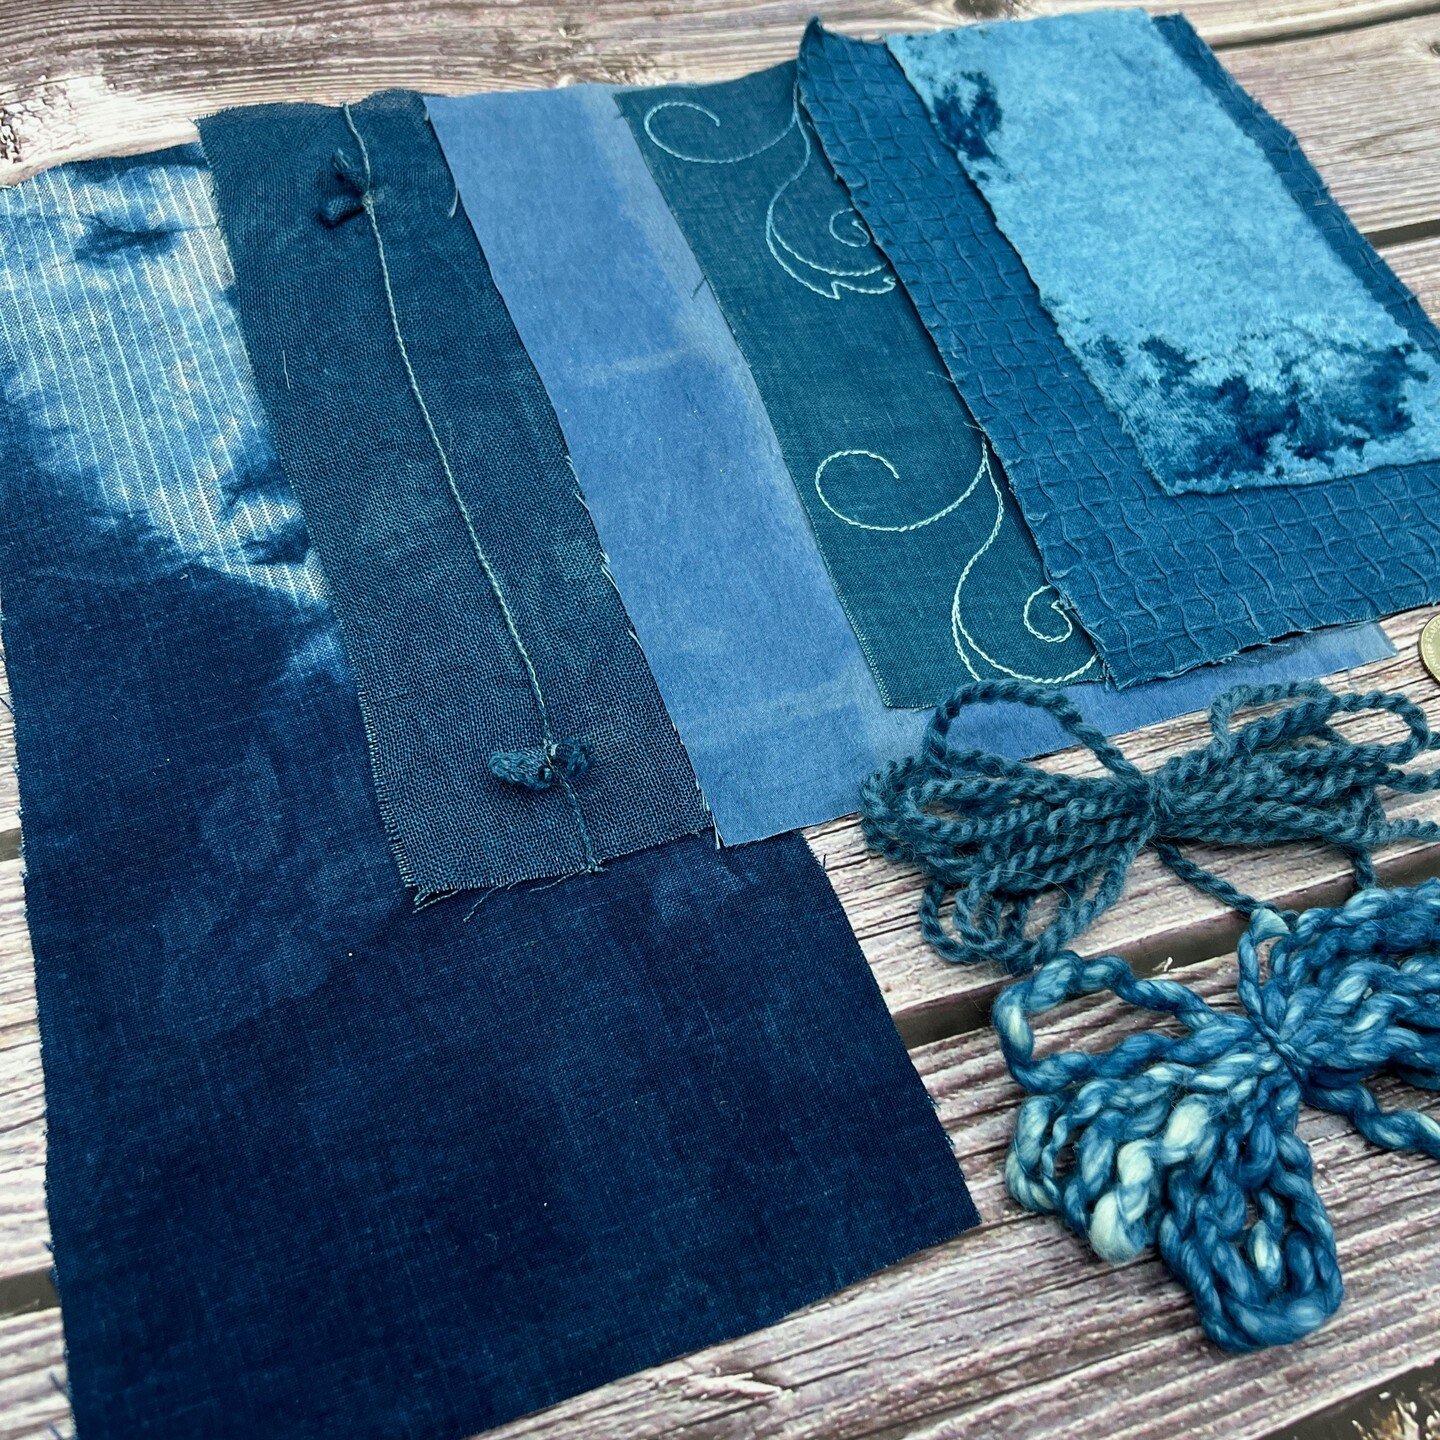 Ocean (3) is a #plantdyed linen, silk, and cotton fabric pack dyed with natural indigo from @botanicalcolors
All of these secondhand fabrics are sourced from vintage materials and unwanted #upcycledclothing

I only have this one indigo pack left, but